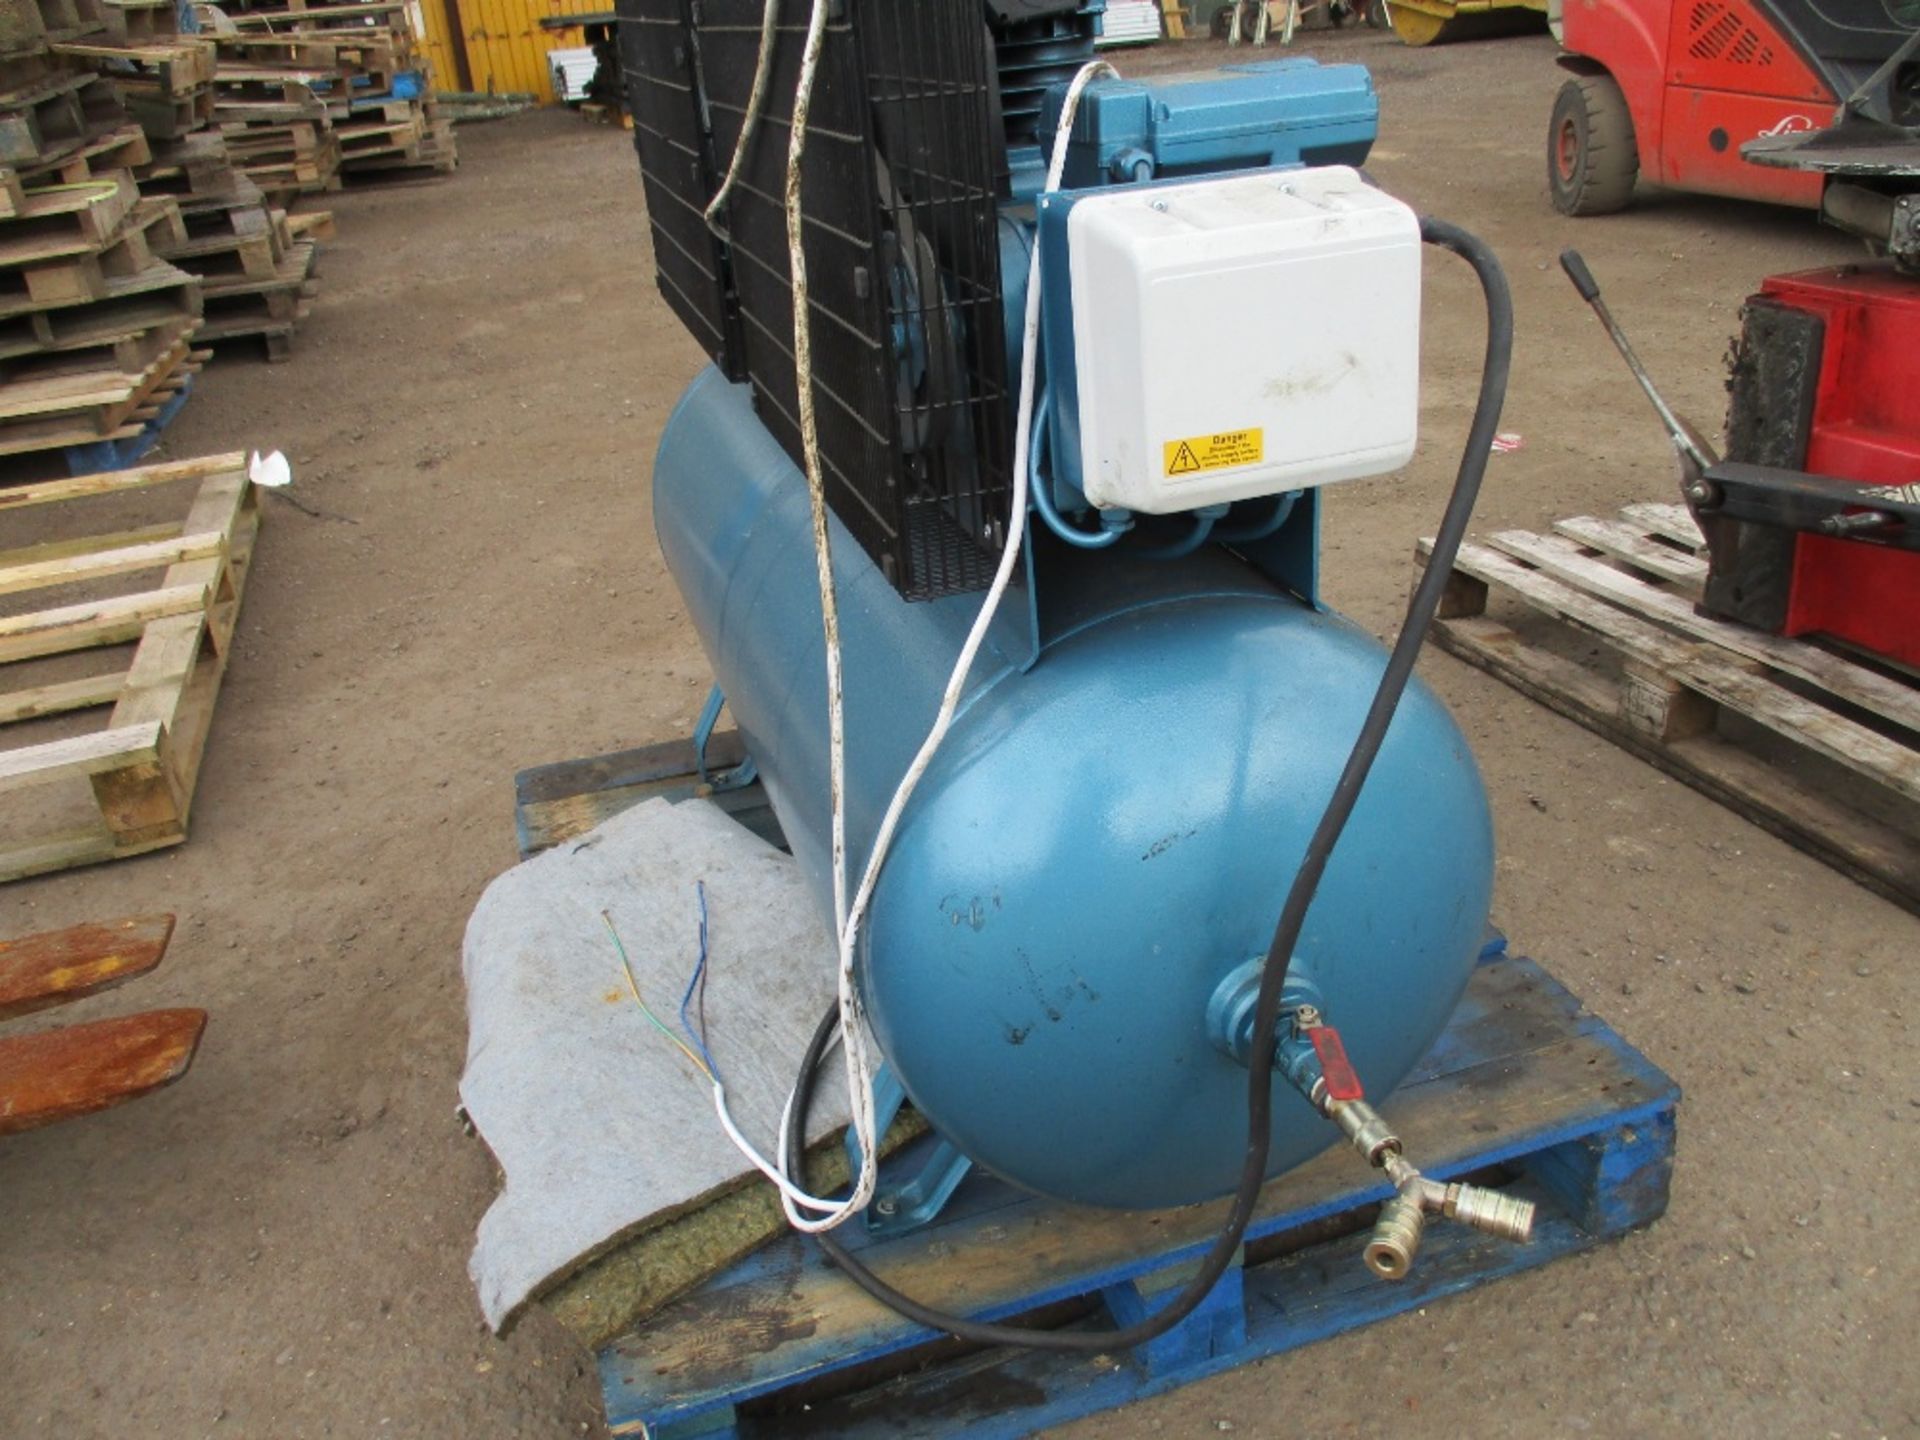 CLARKE TWIN MOTORED AIR COMPRESSOR SINGLE PHASE YEAR 2014 BUILD SOURCED FROM COMPANY CLOSURE - Image 6 of 6